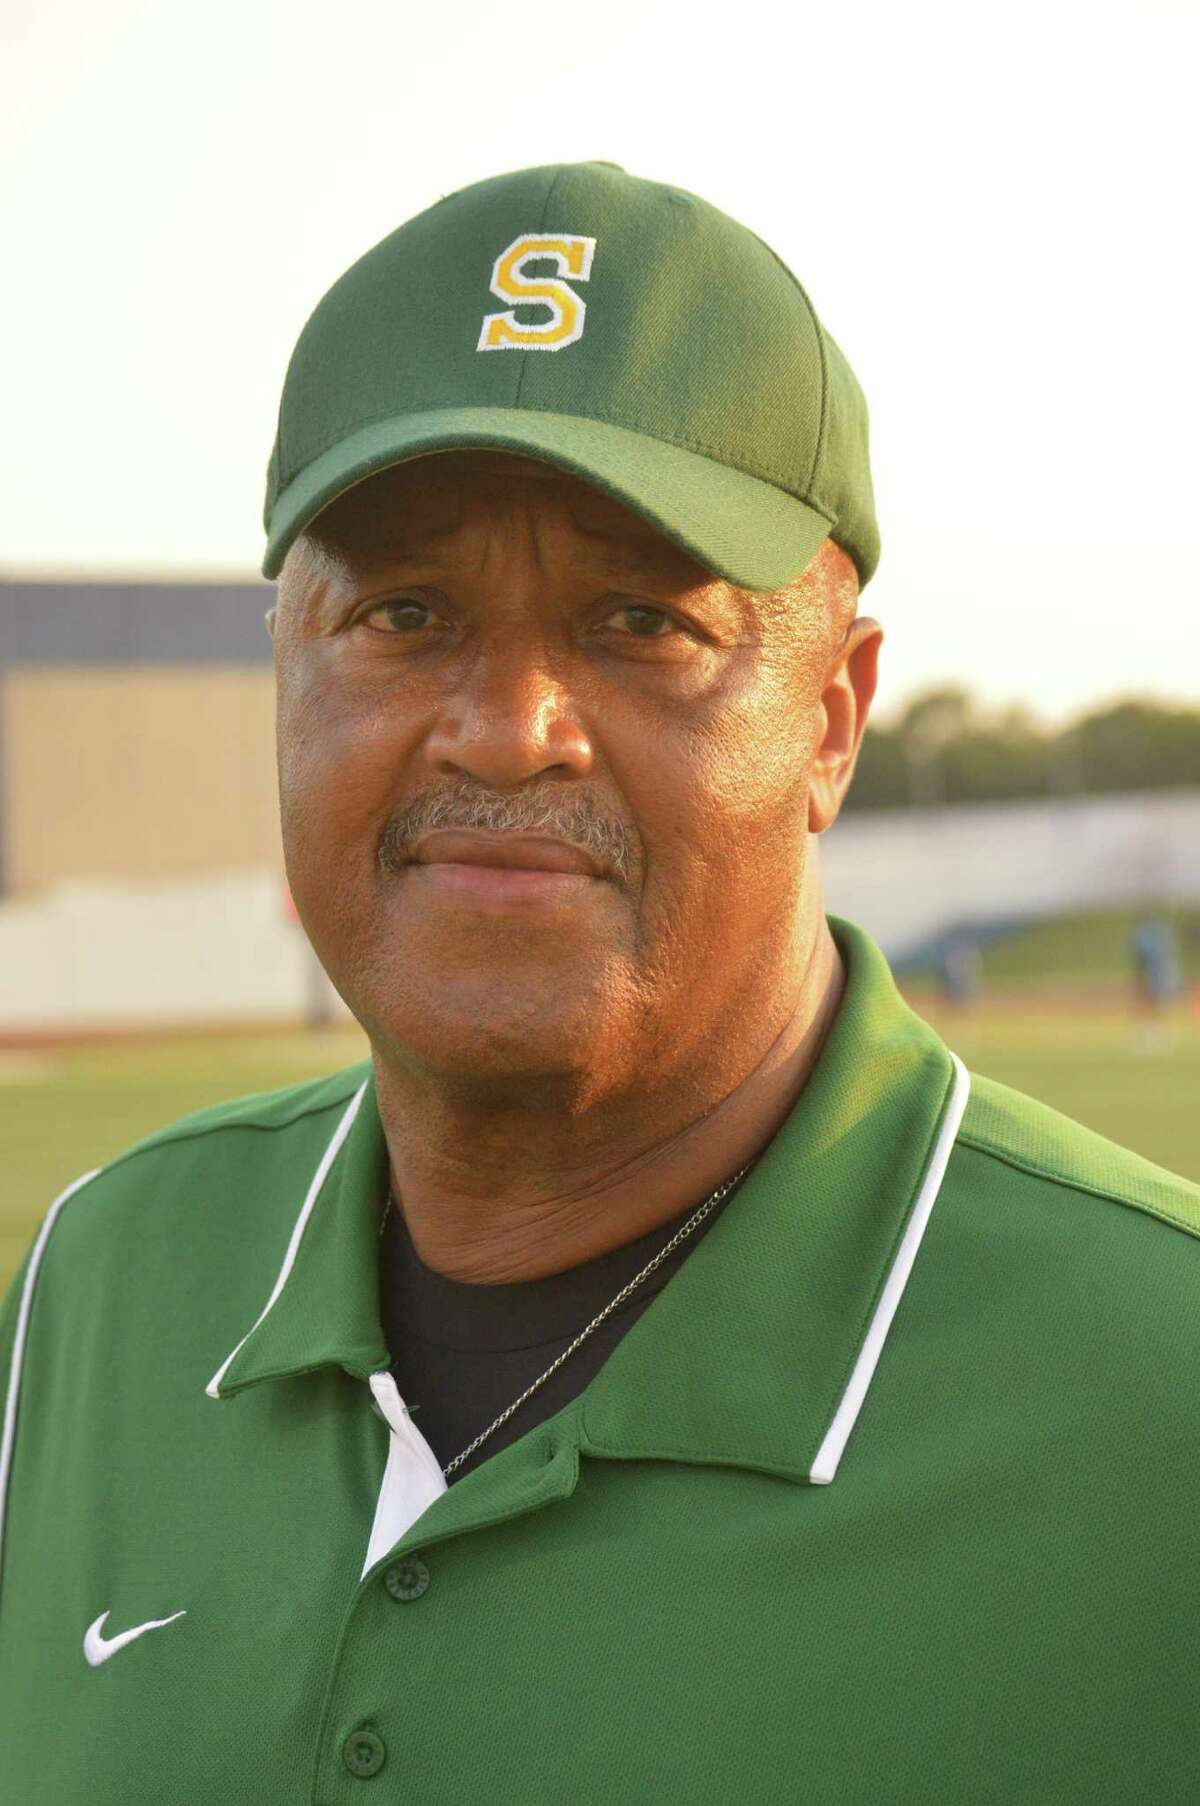 Veteran coach leads young Sharpstown squad into District 21-4A play